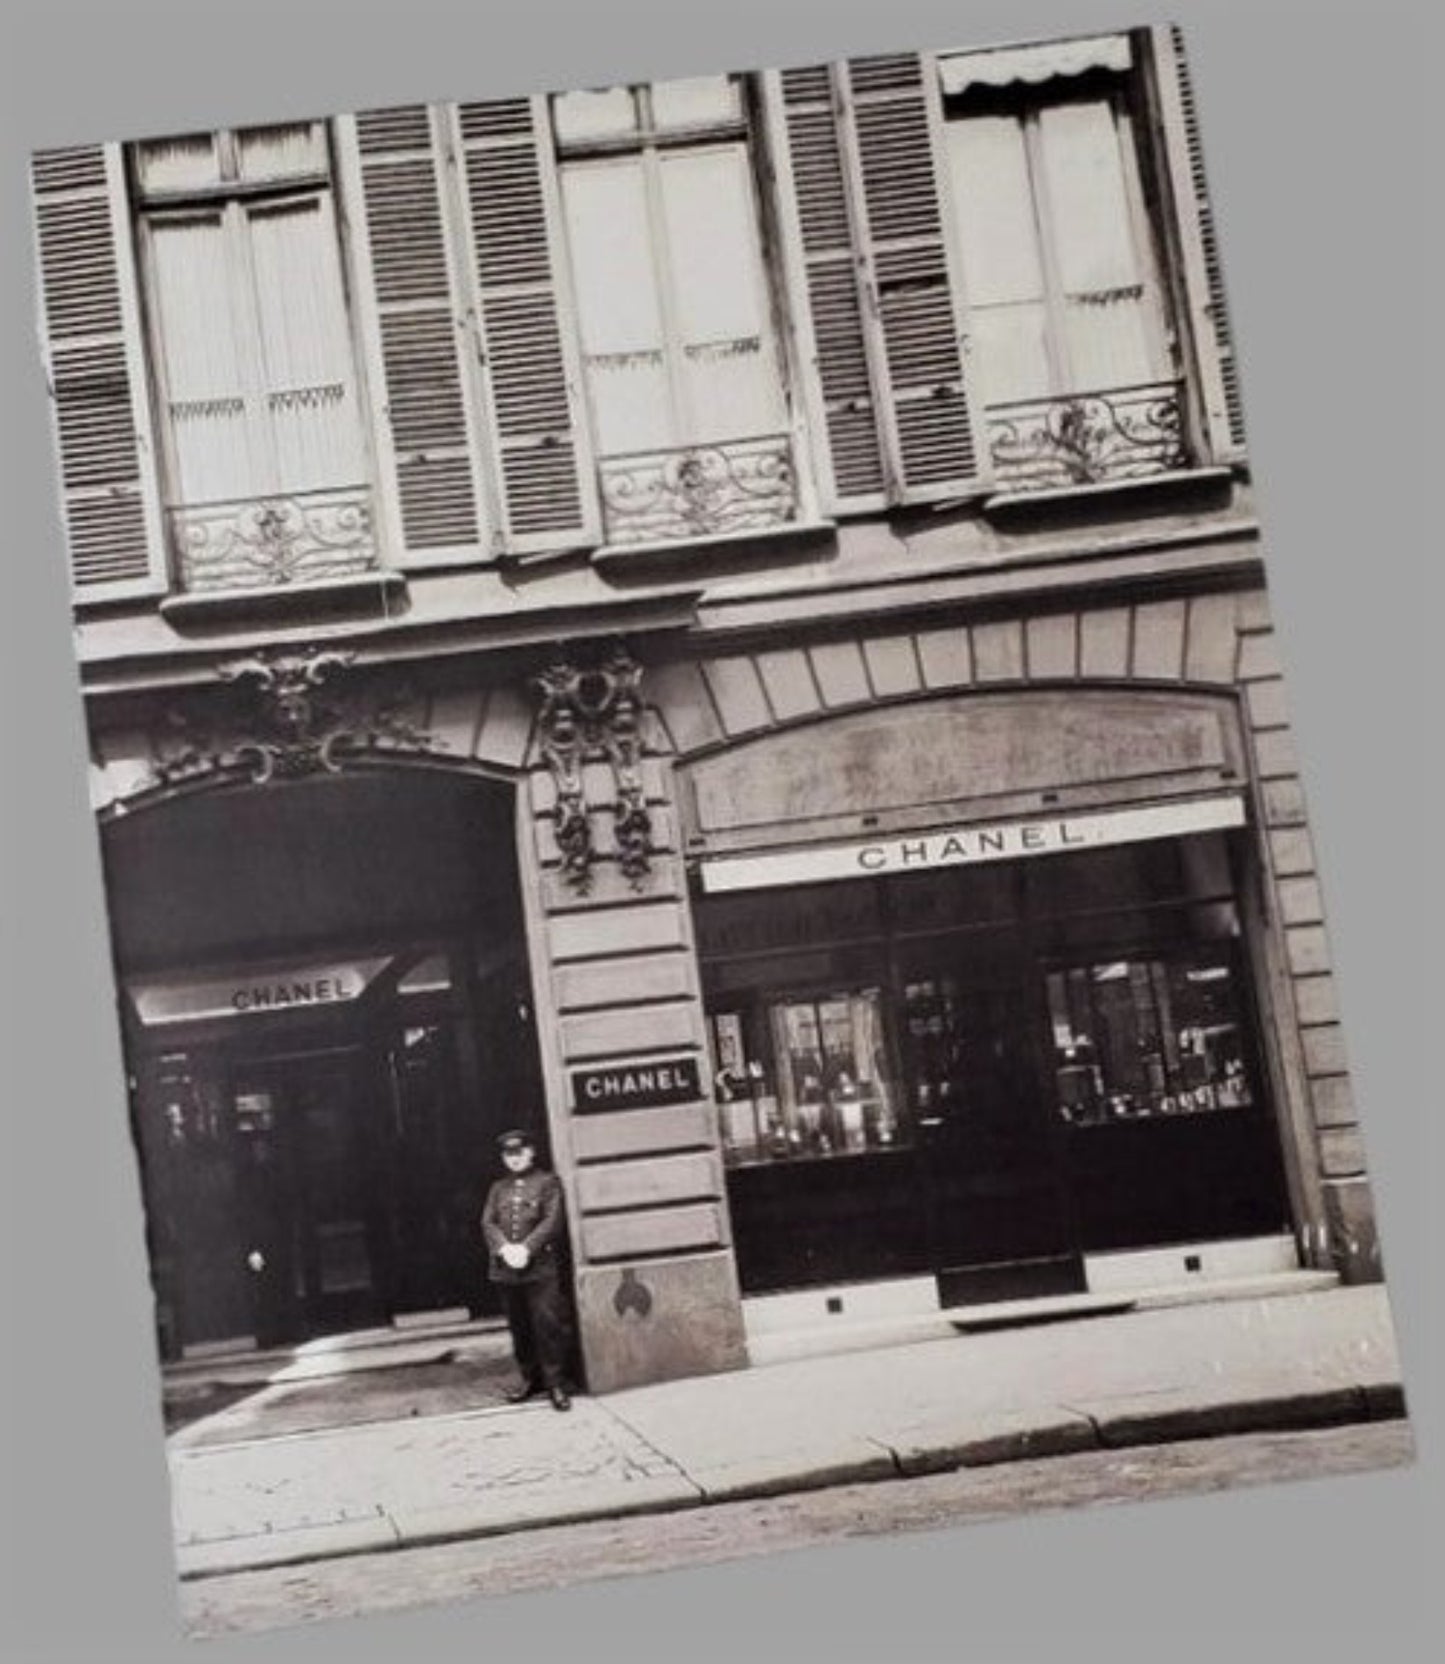 Chanel Store Paris Photograph Art Print Available In AREA51GALLERY